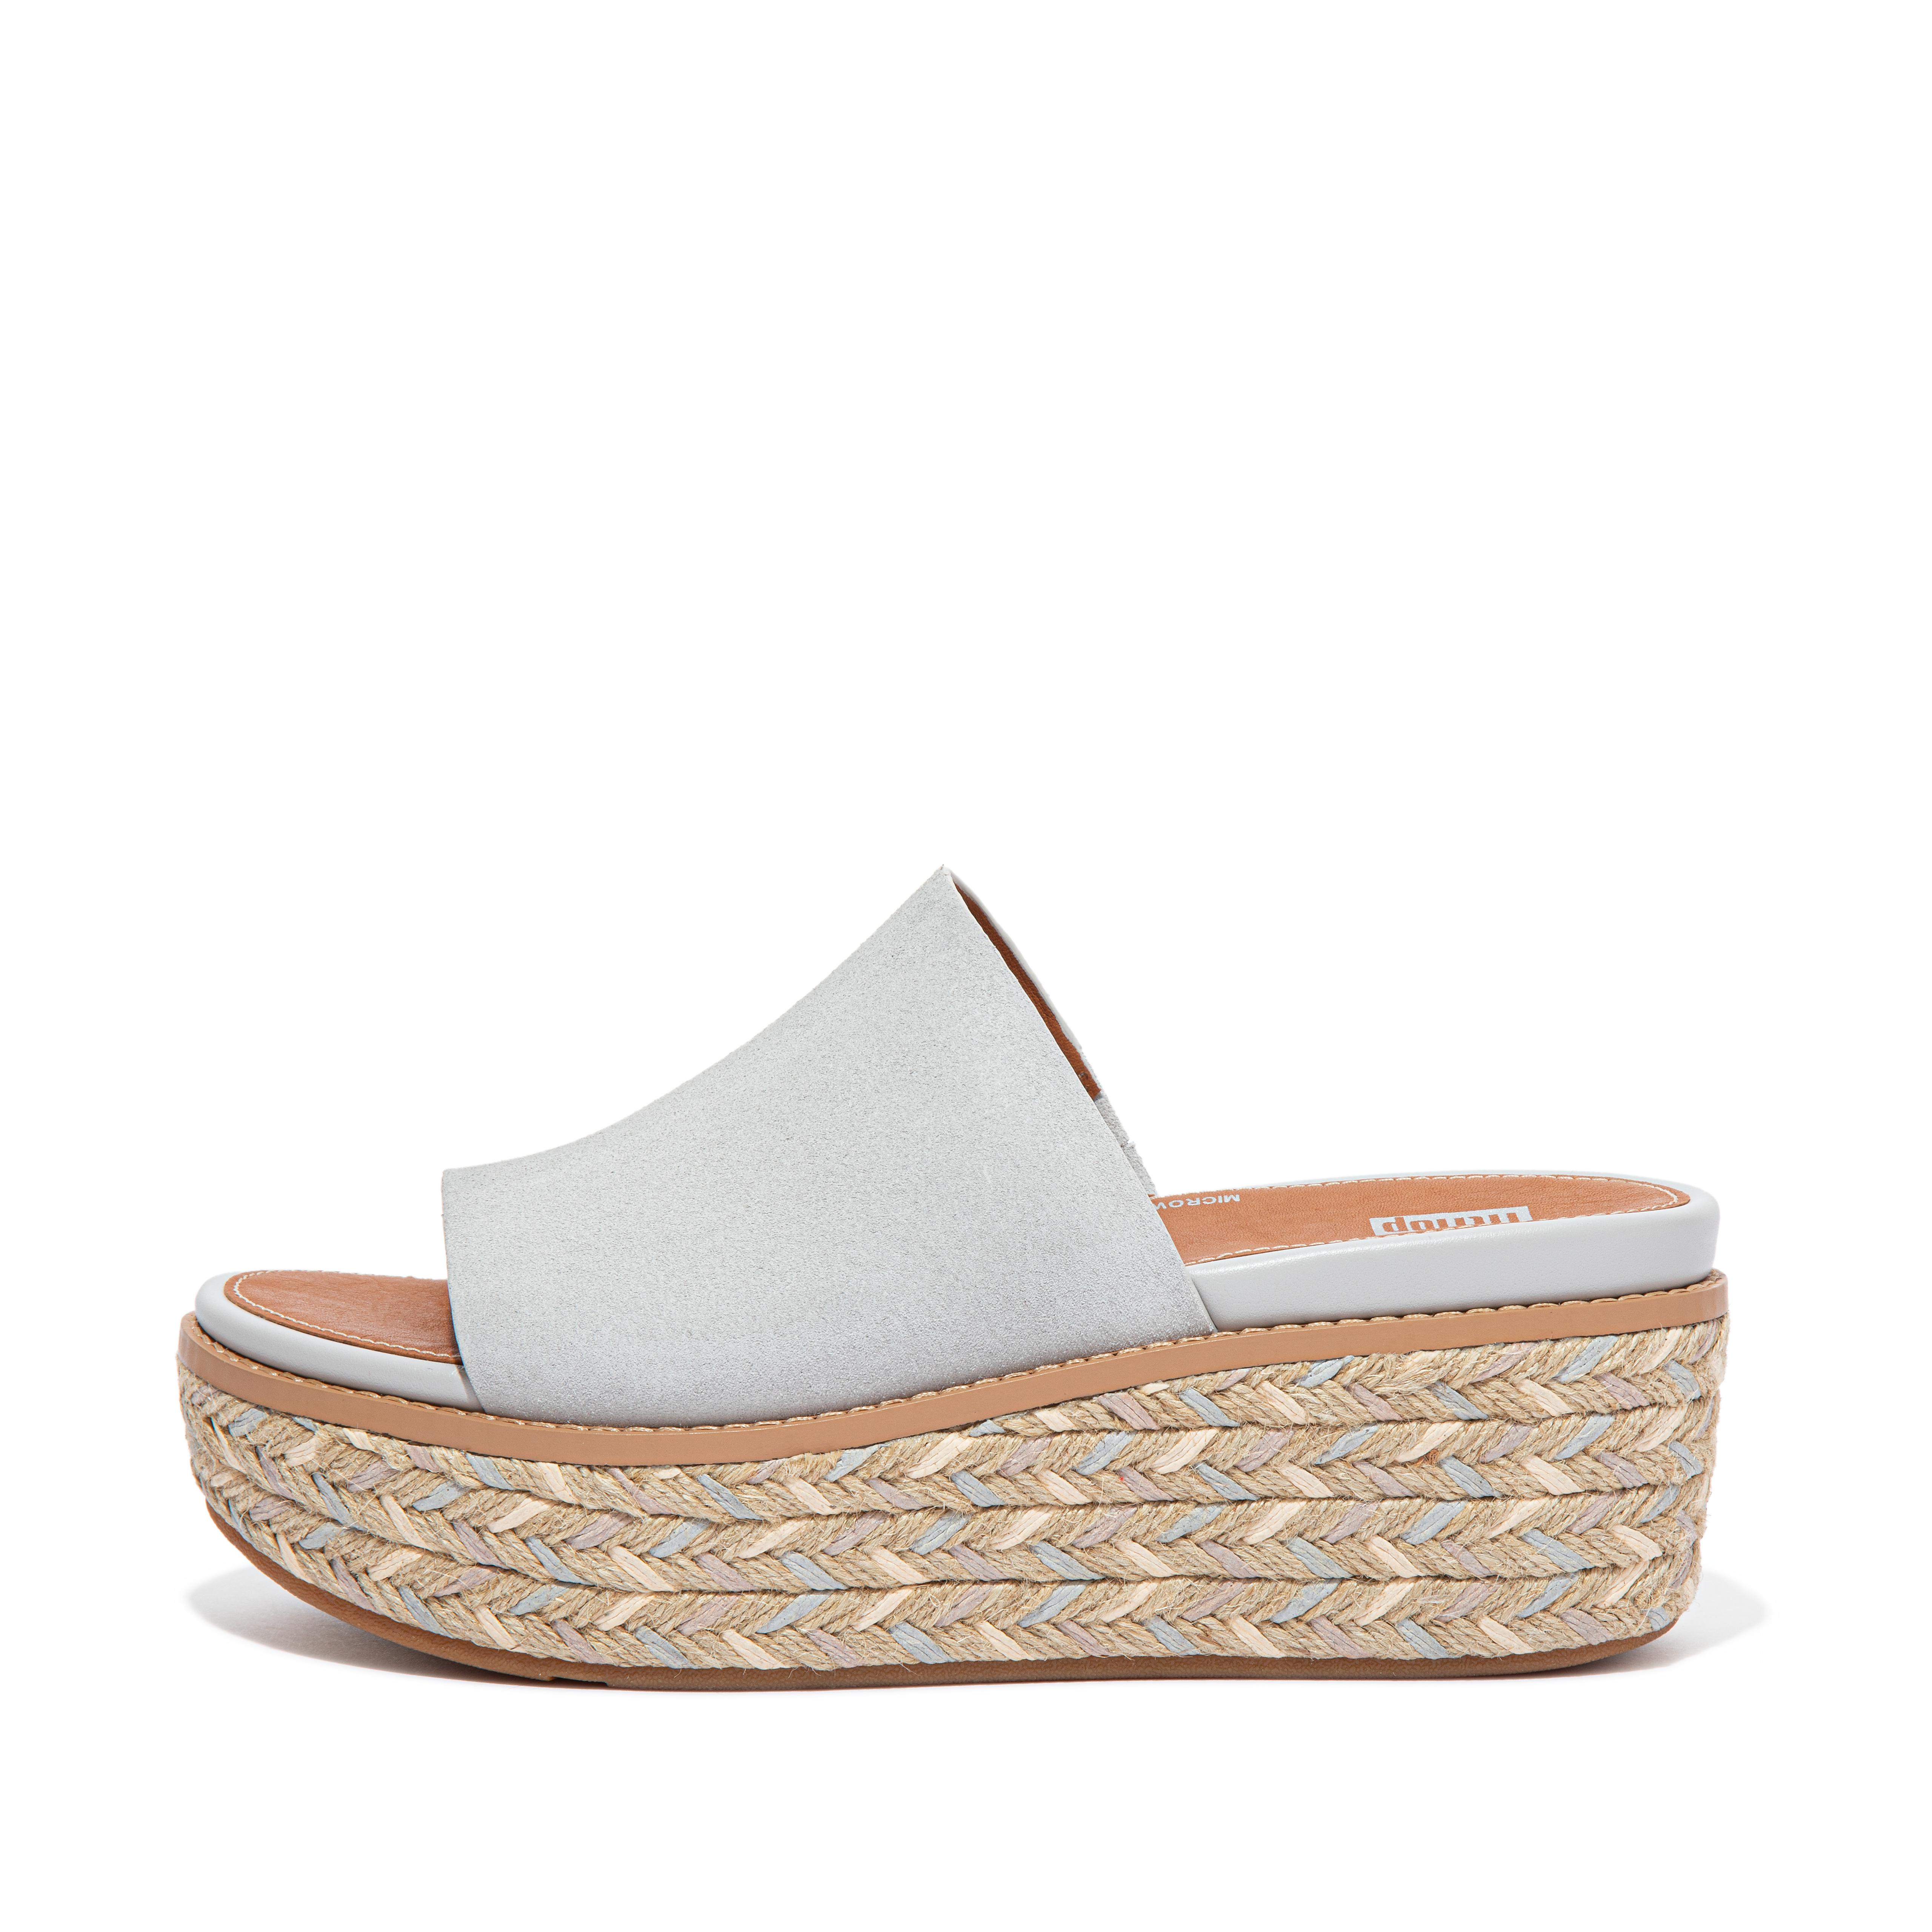 Image of FitFlop Eloise